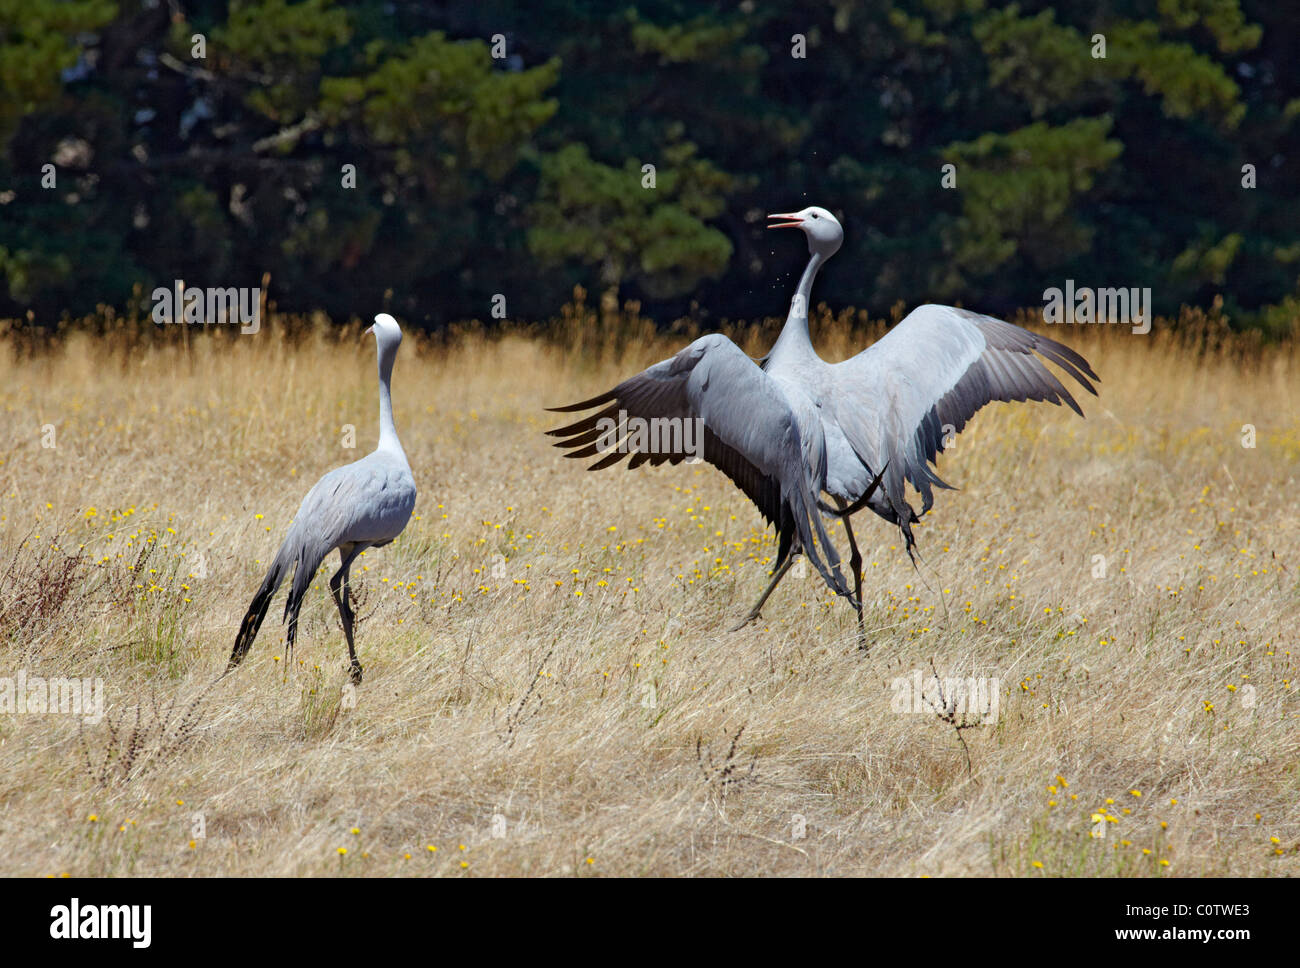 Blue Cranes - the national bird of South Africa. Oak Valley Estate, Elgin, Western Cape, South Africa. Stock Photo